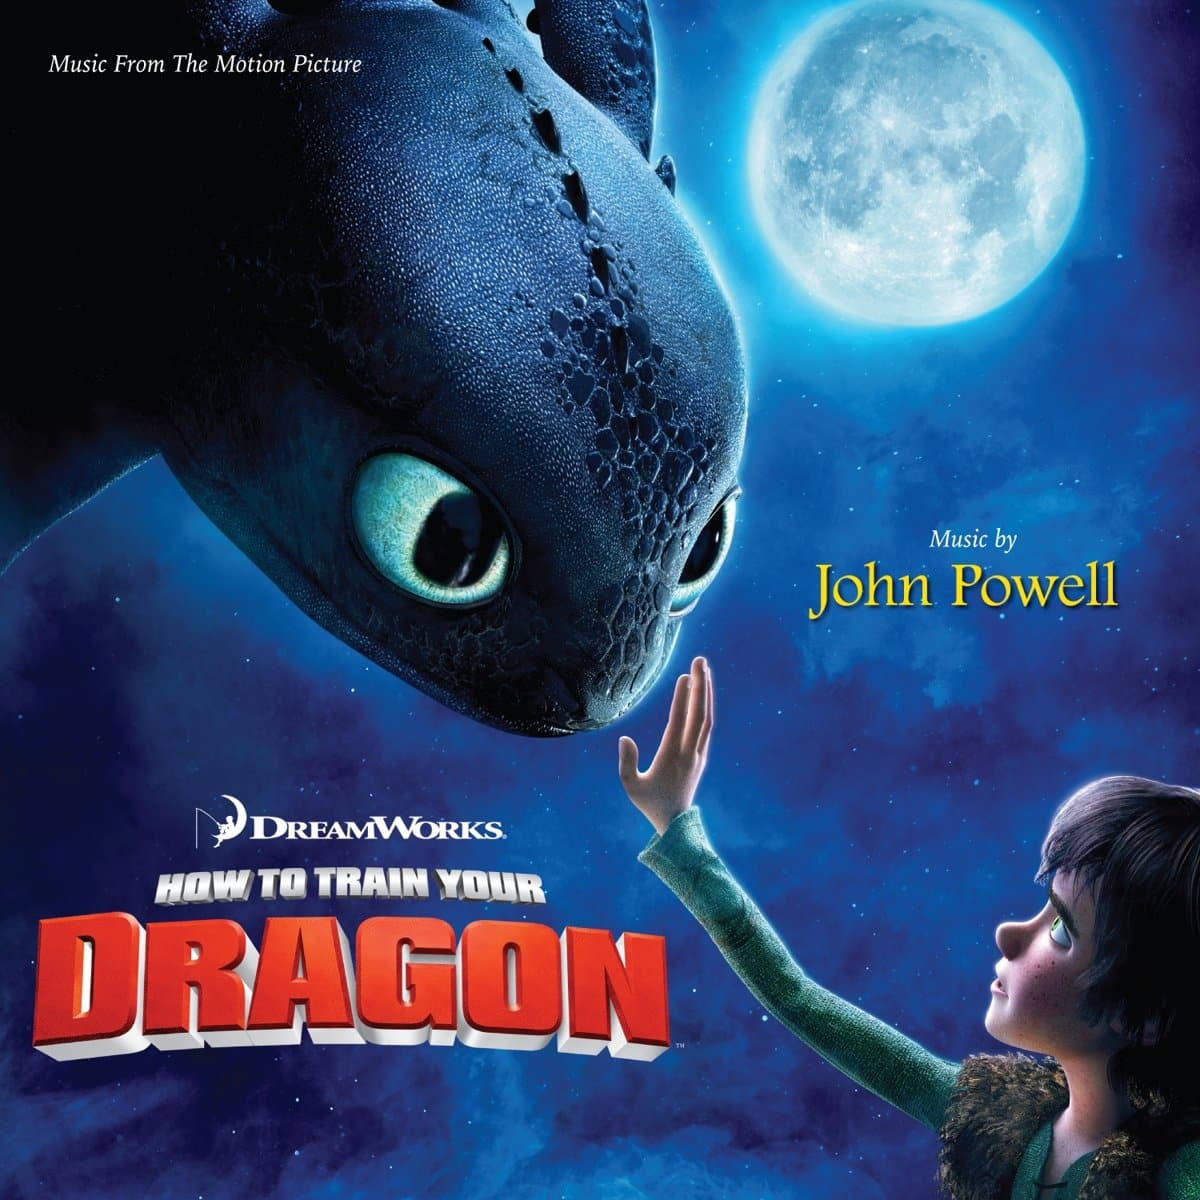 Soundtrack album cover for How To Train Your Dragon, Viking boy reached towards a black dragon in the moonlight.